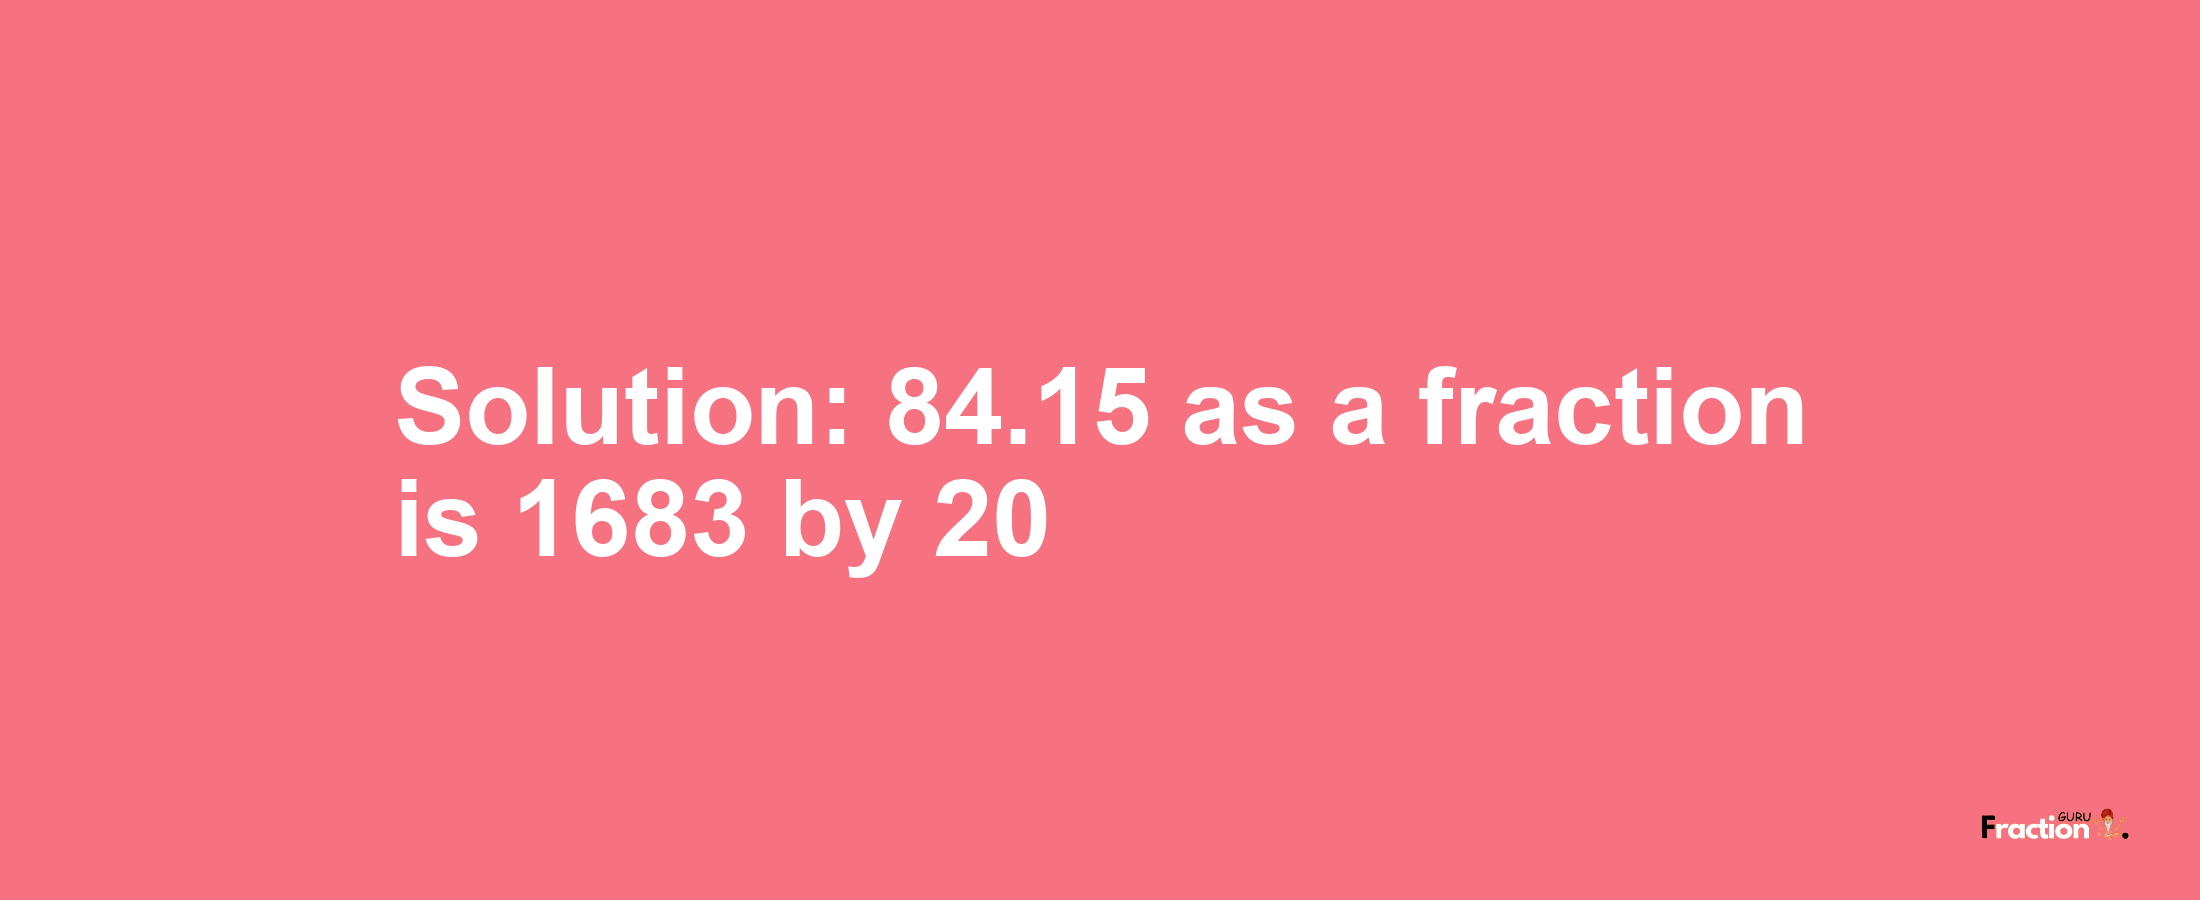 Solution:84.15 as a fraction is 1683/20